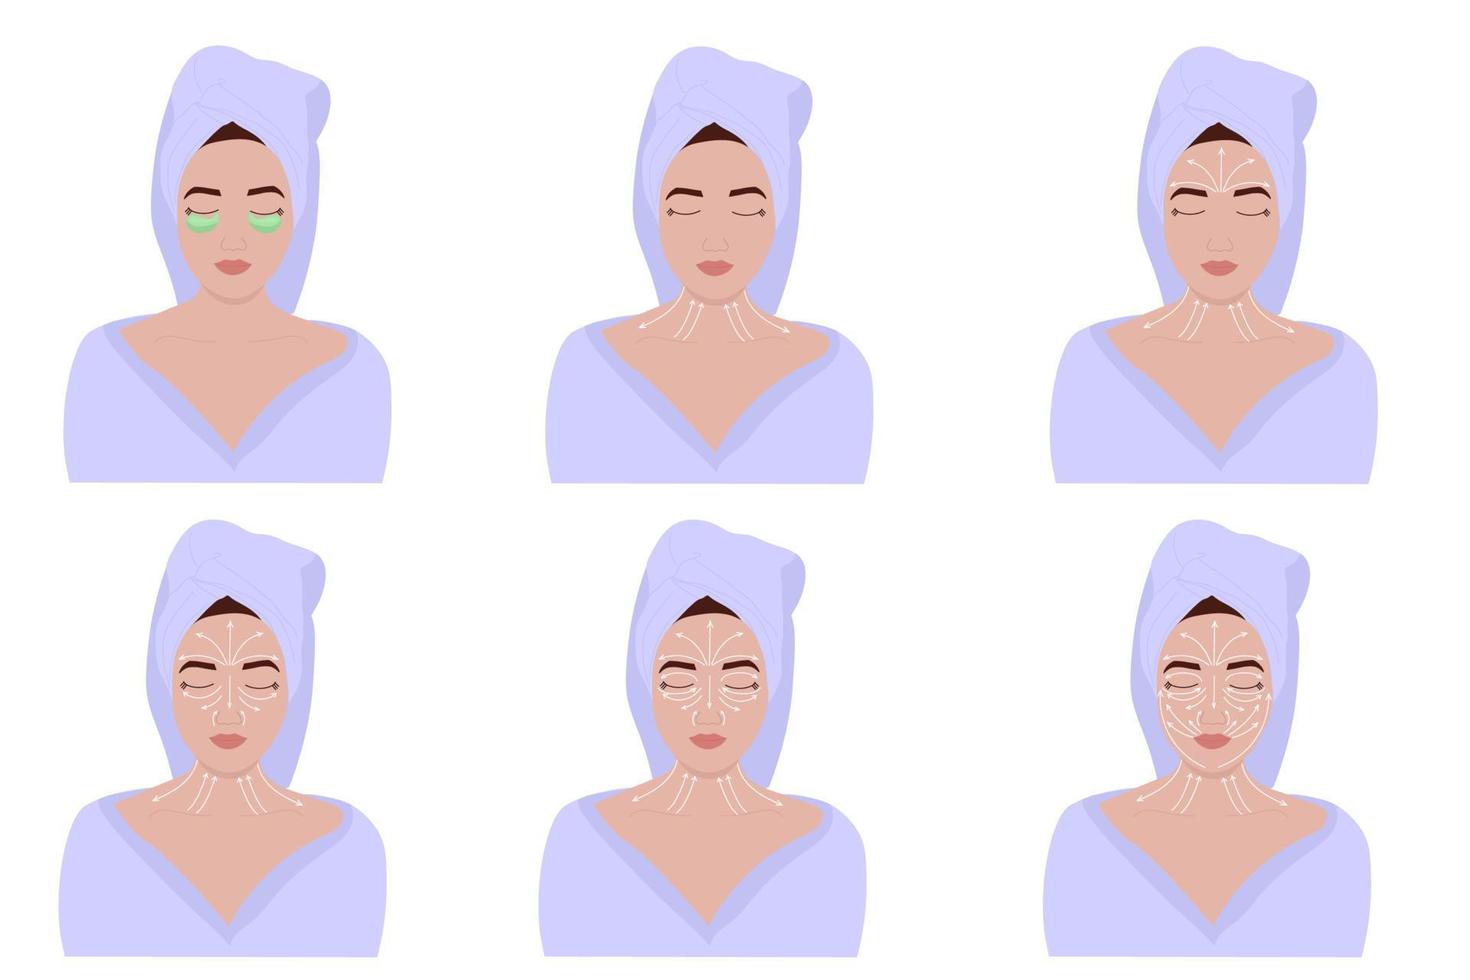 Gua Sha massage. Massage lines on the face, instructions on how to do facial massage vector